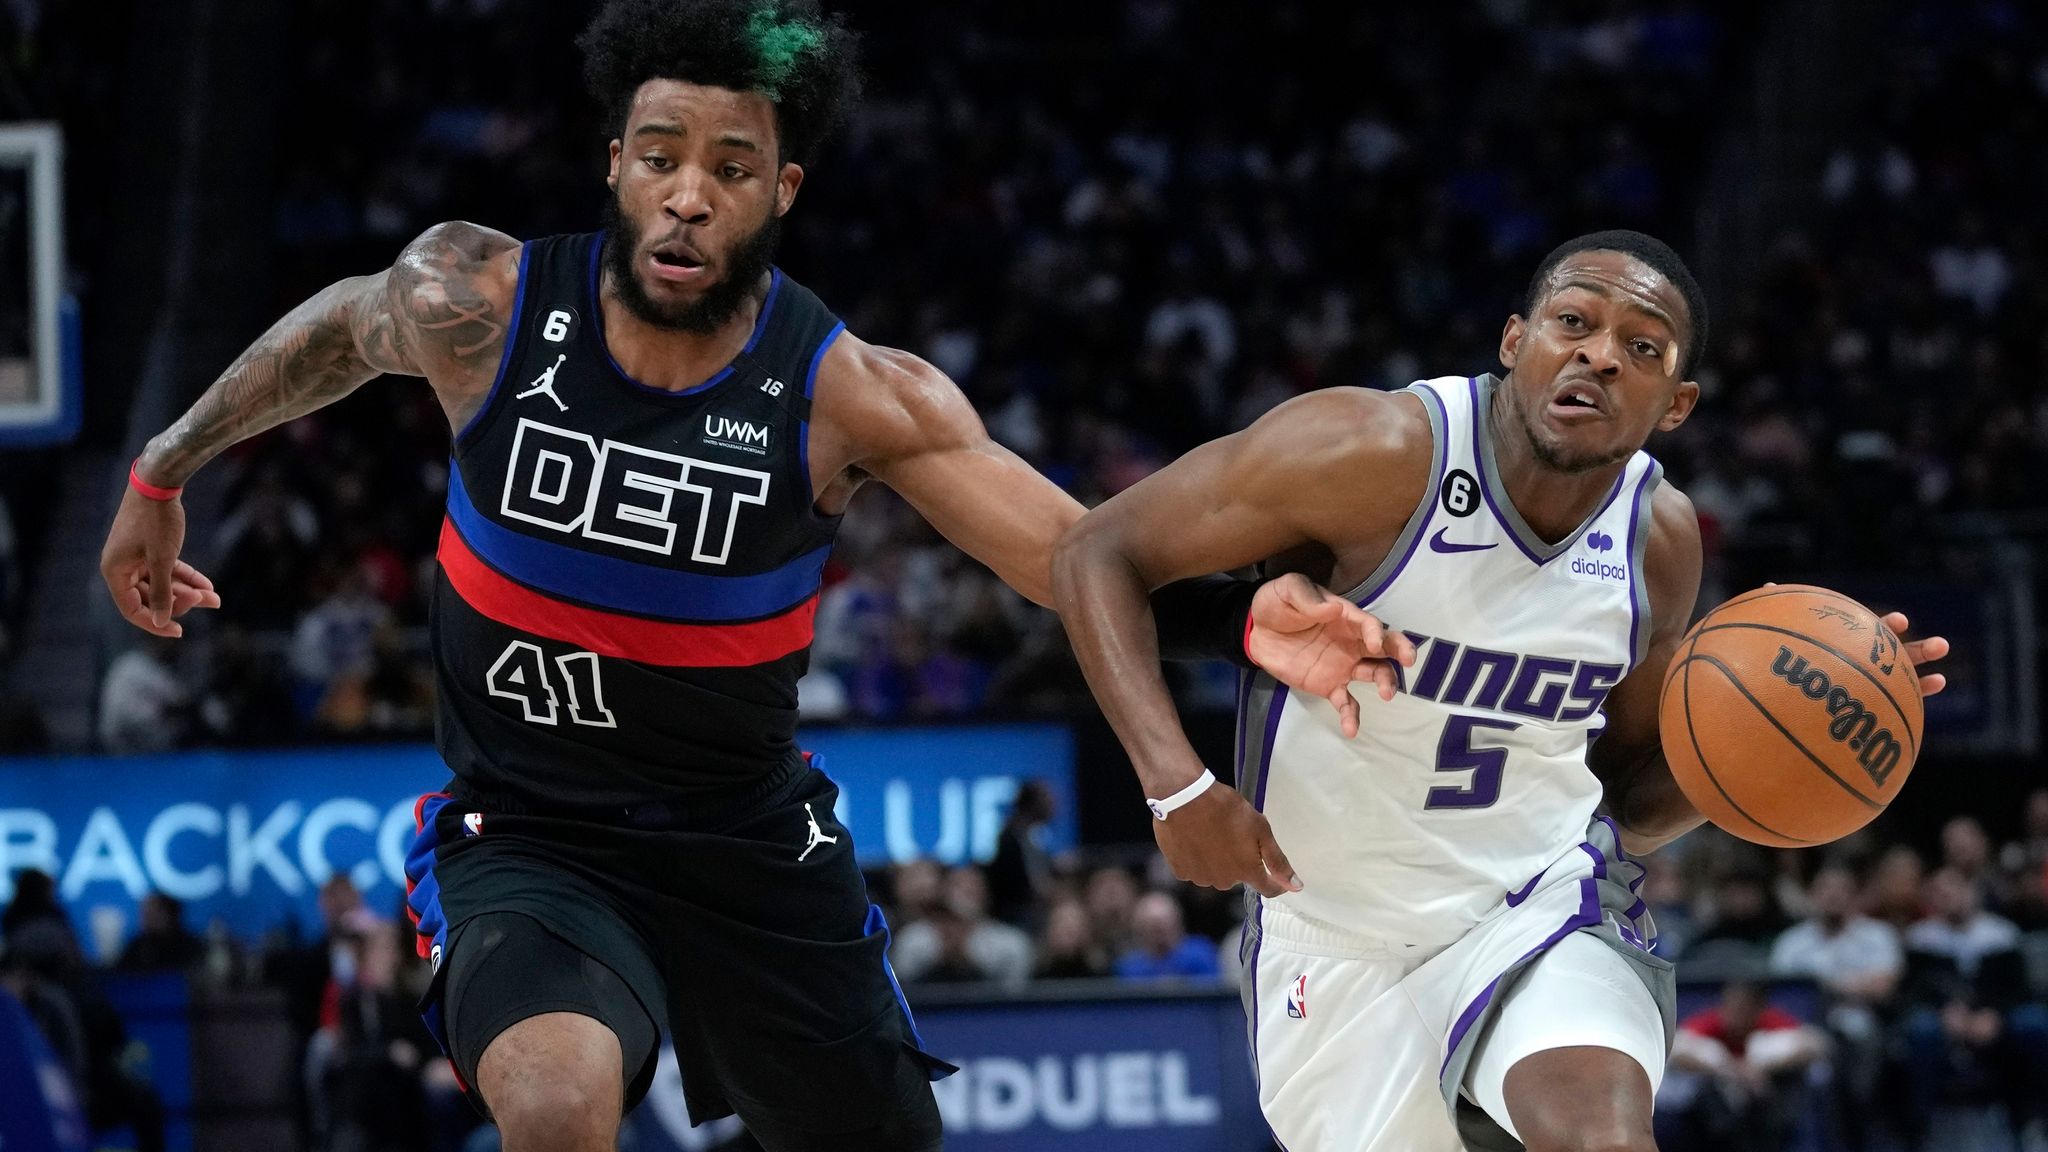 Detroit Pistons cruise to road win against Sacramento Kings, 113-101